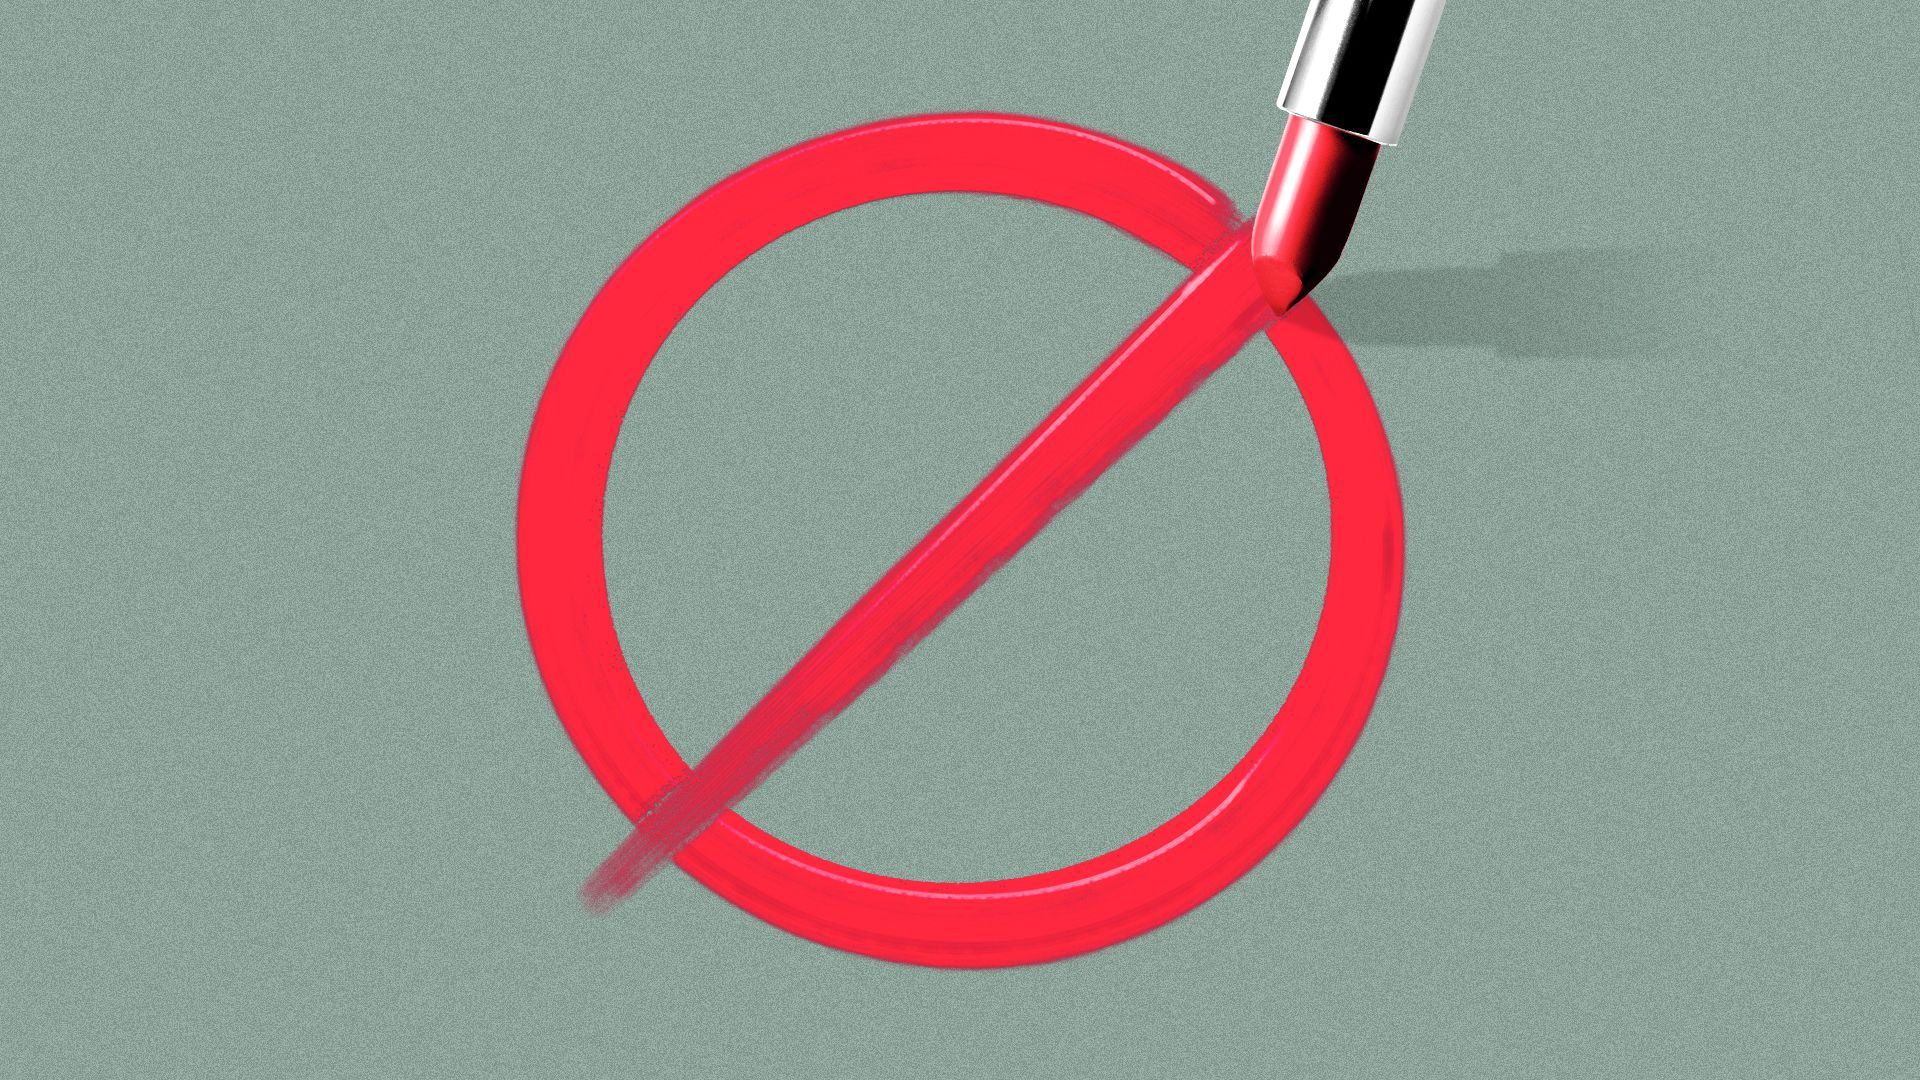 Illustration of a no-sign being drawn in red lipstick.